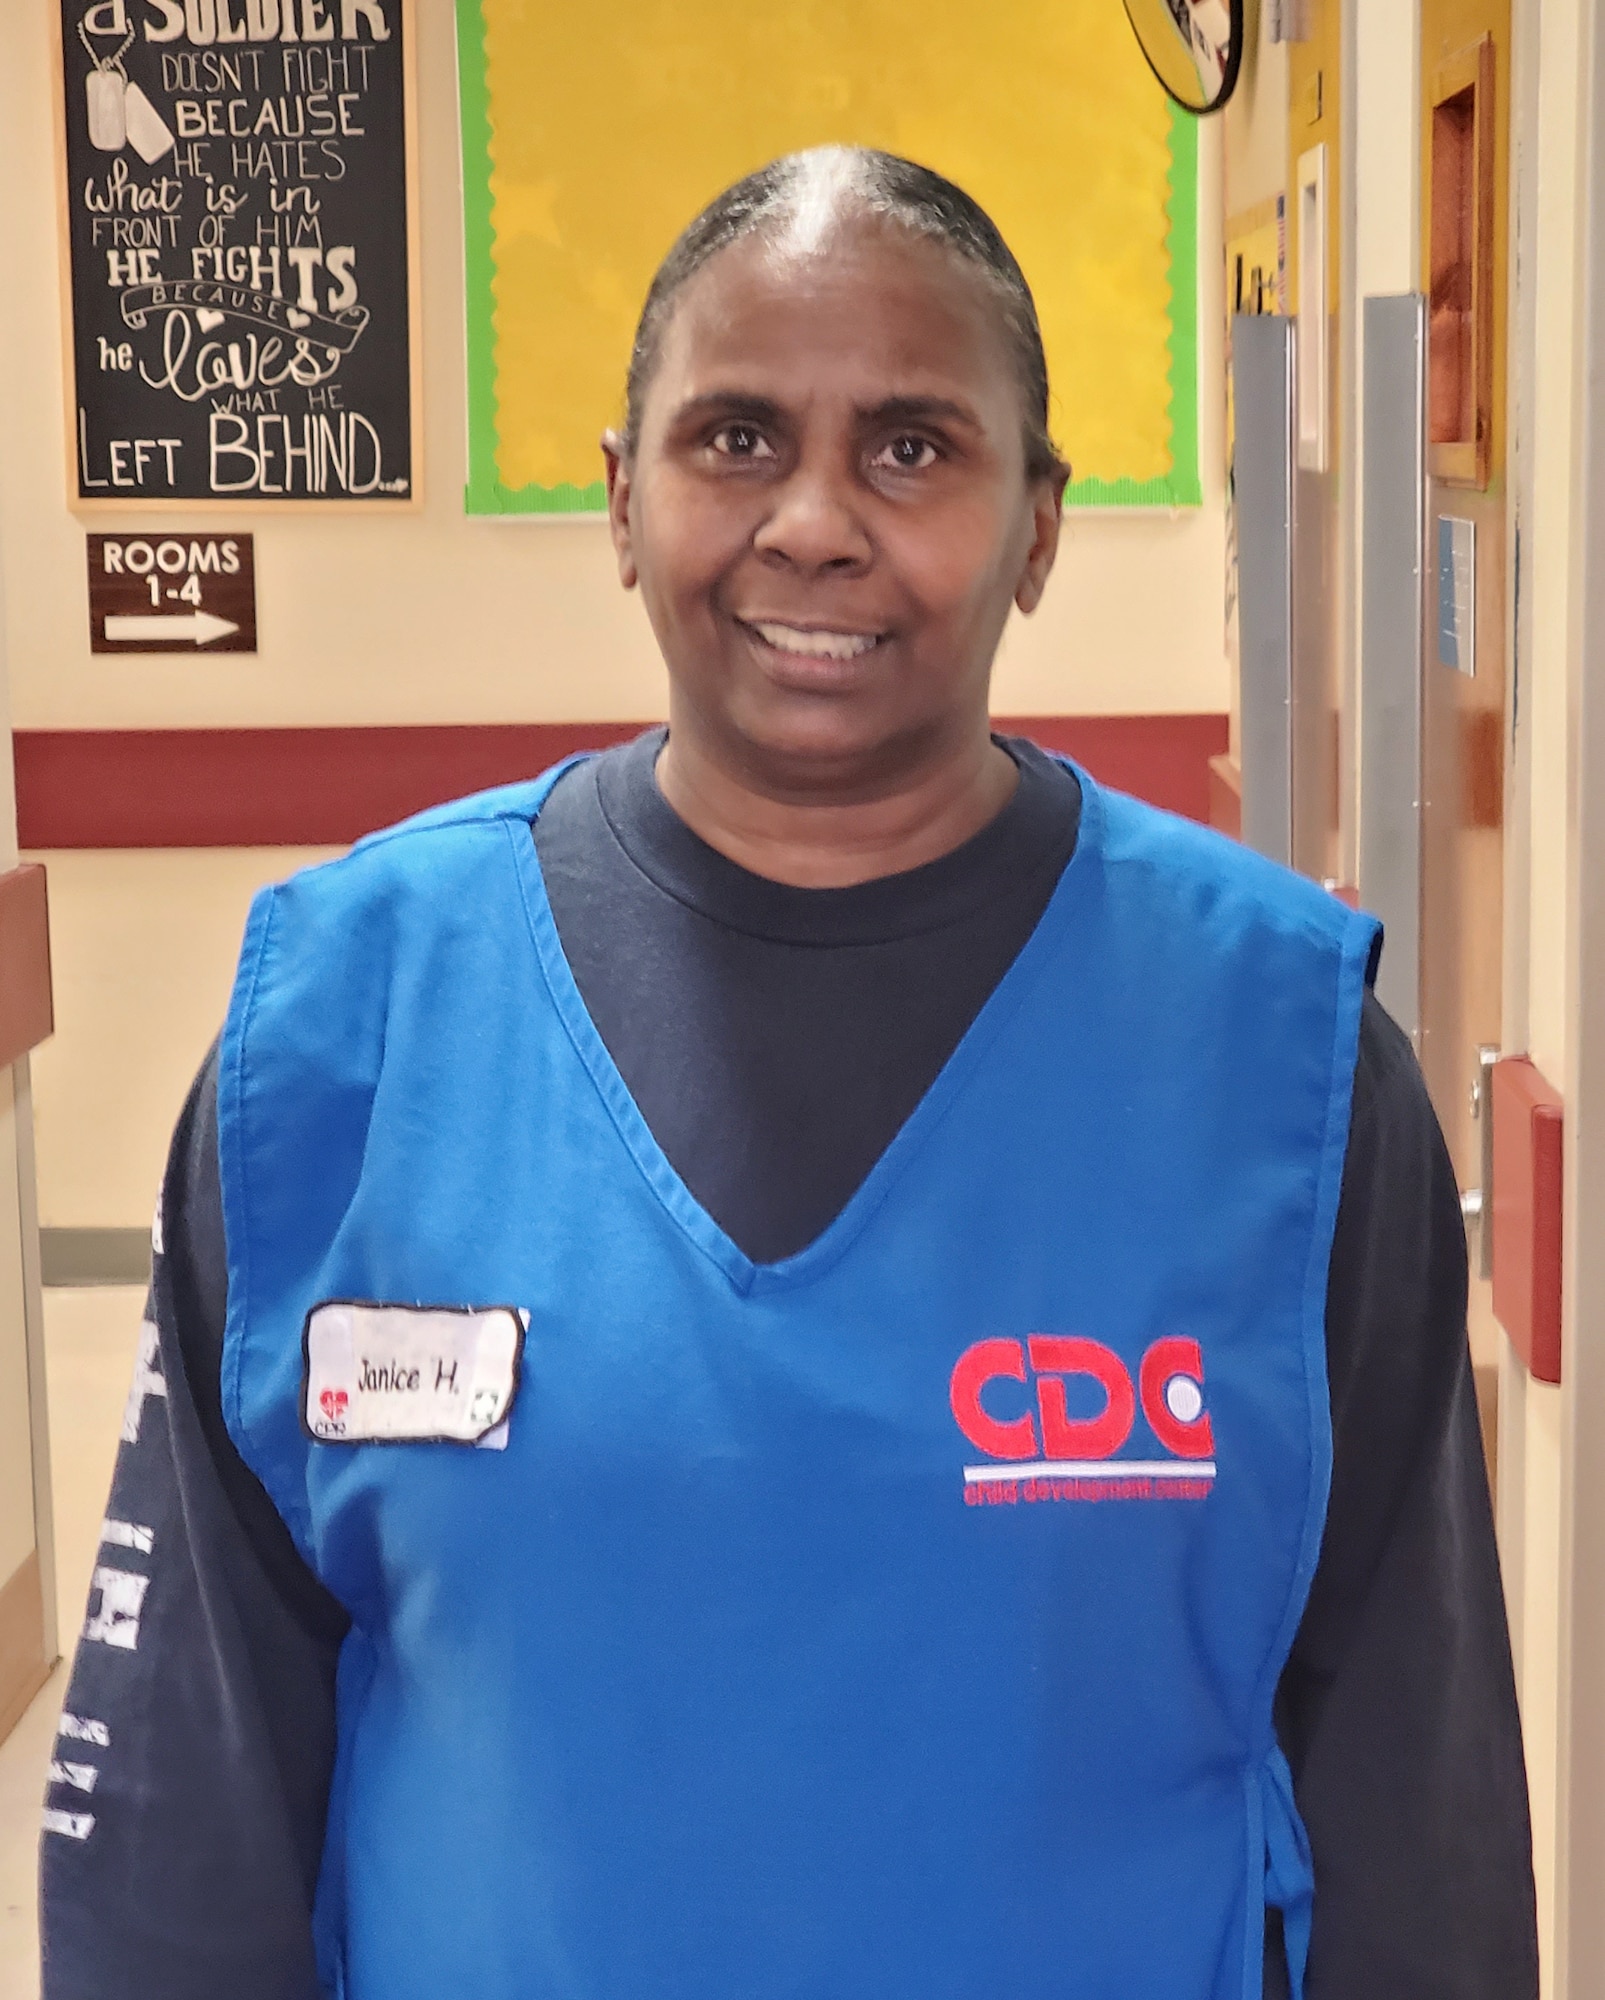 Janice Hill is a child and youth program assistant at the Child Development Center West and has worked at Tinker for 18 years.